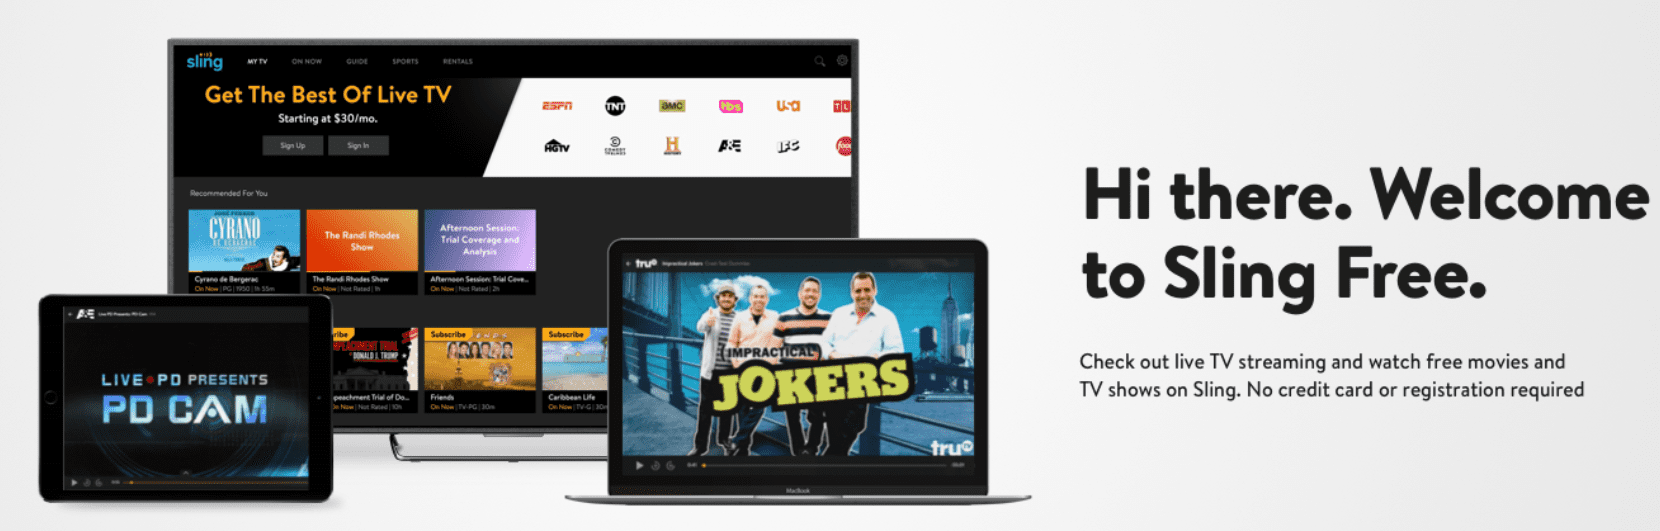 Sling TV Launches 'Sling Free' Free Streaming Service No Credit